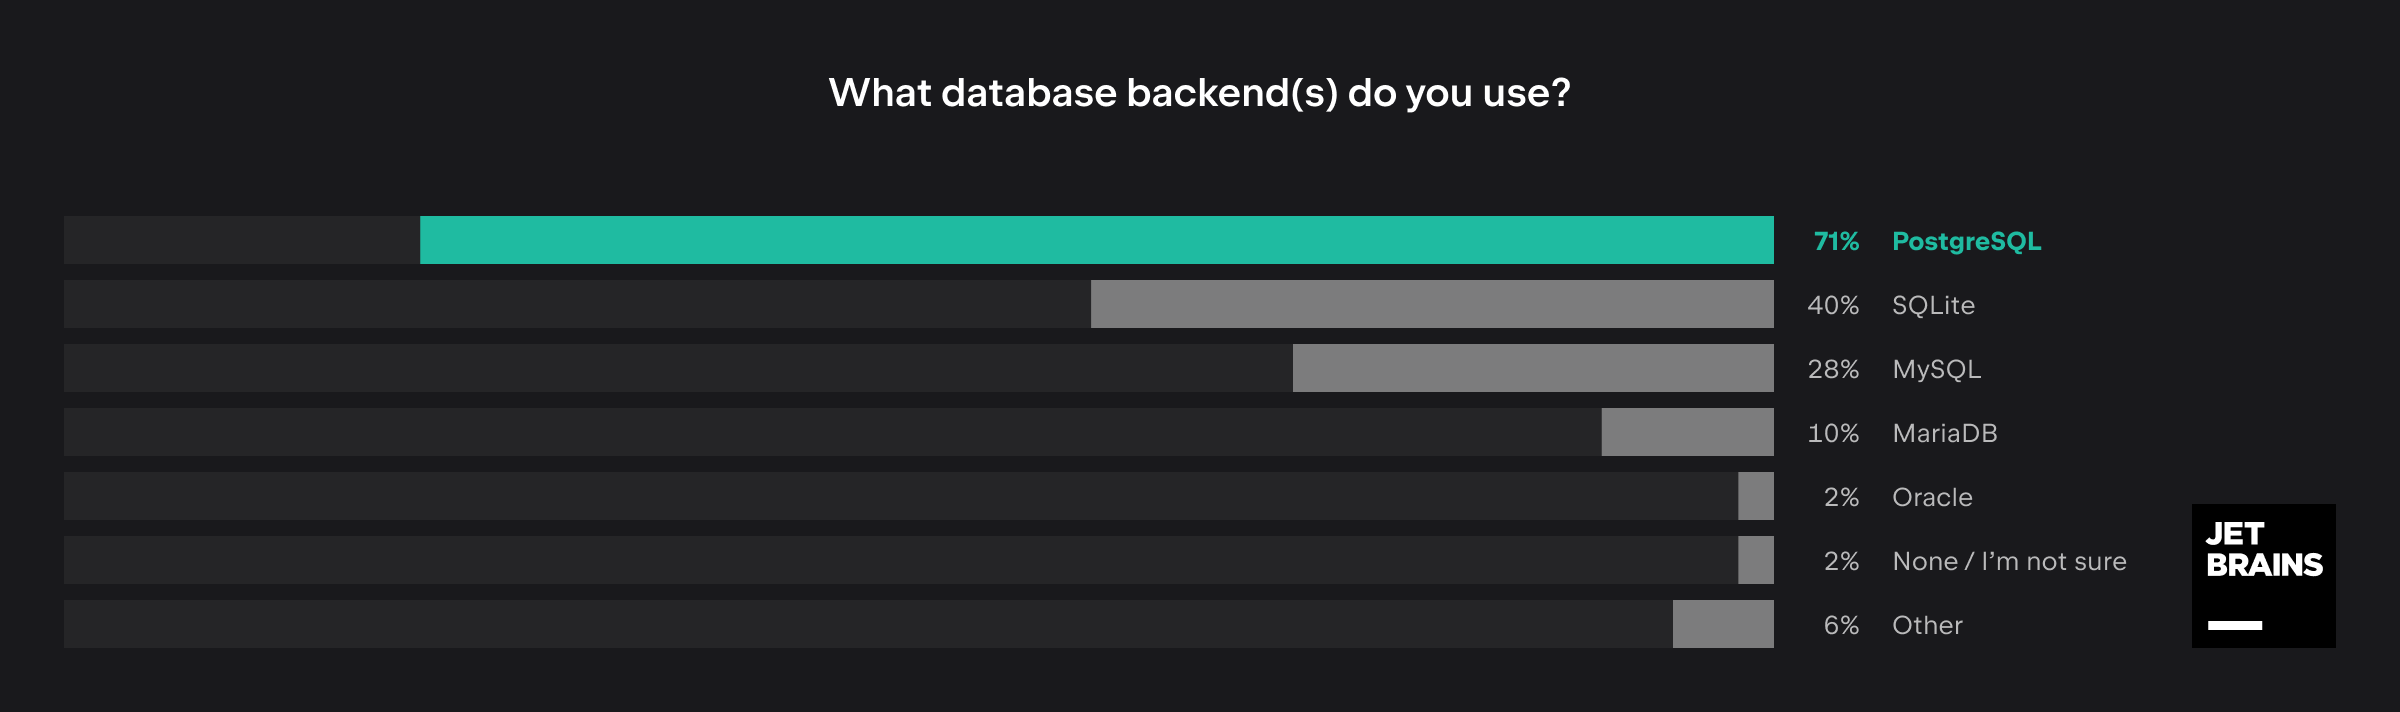 Databases most used by Django developers